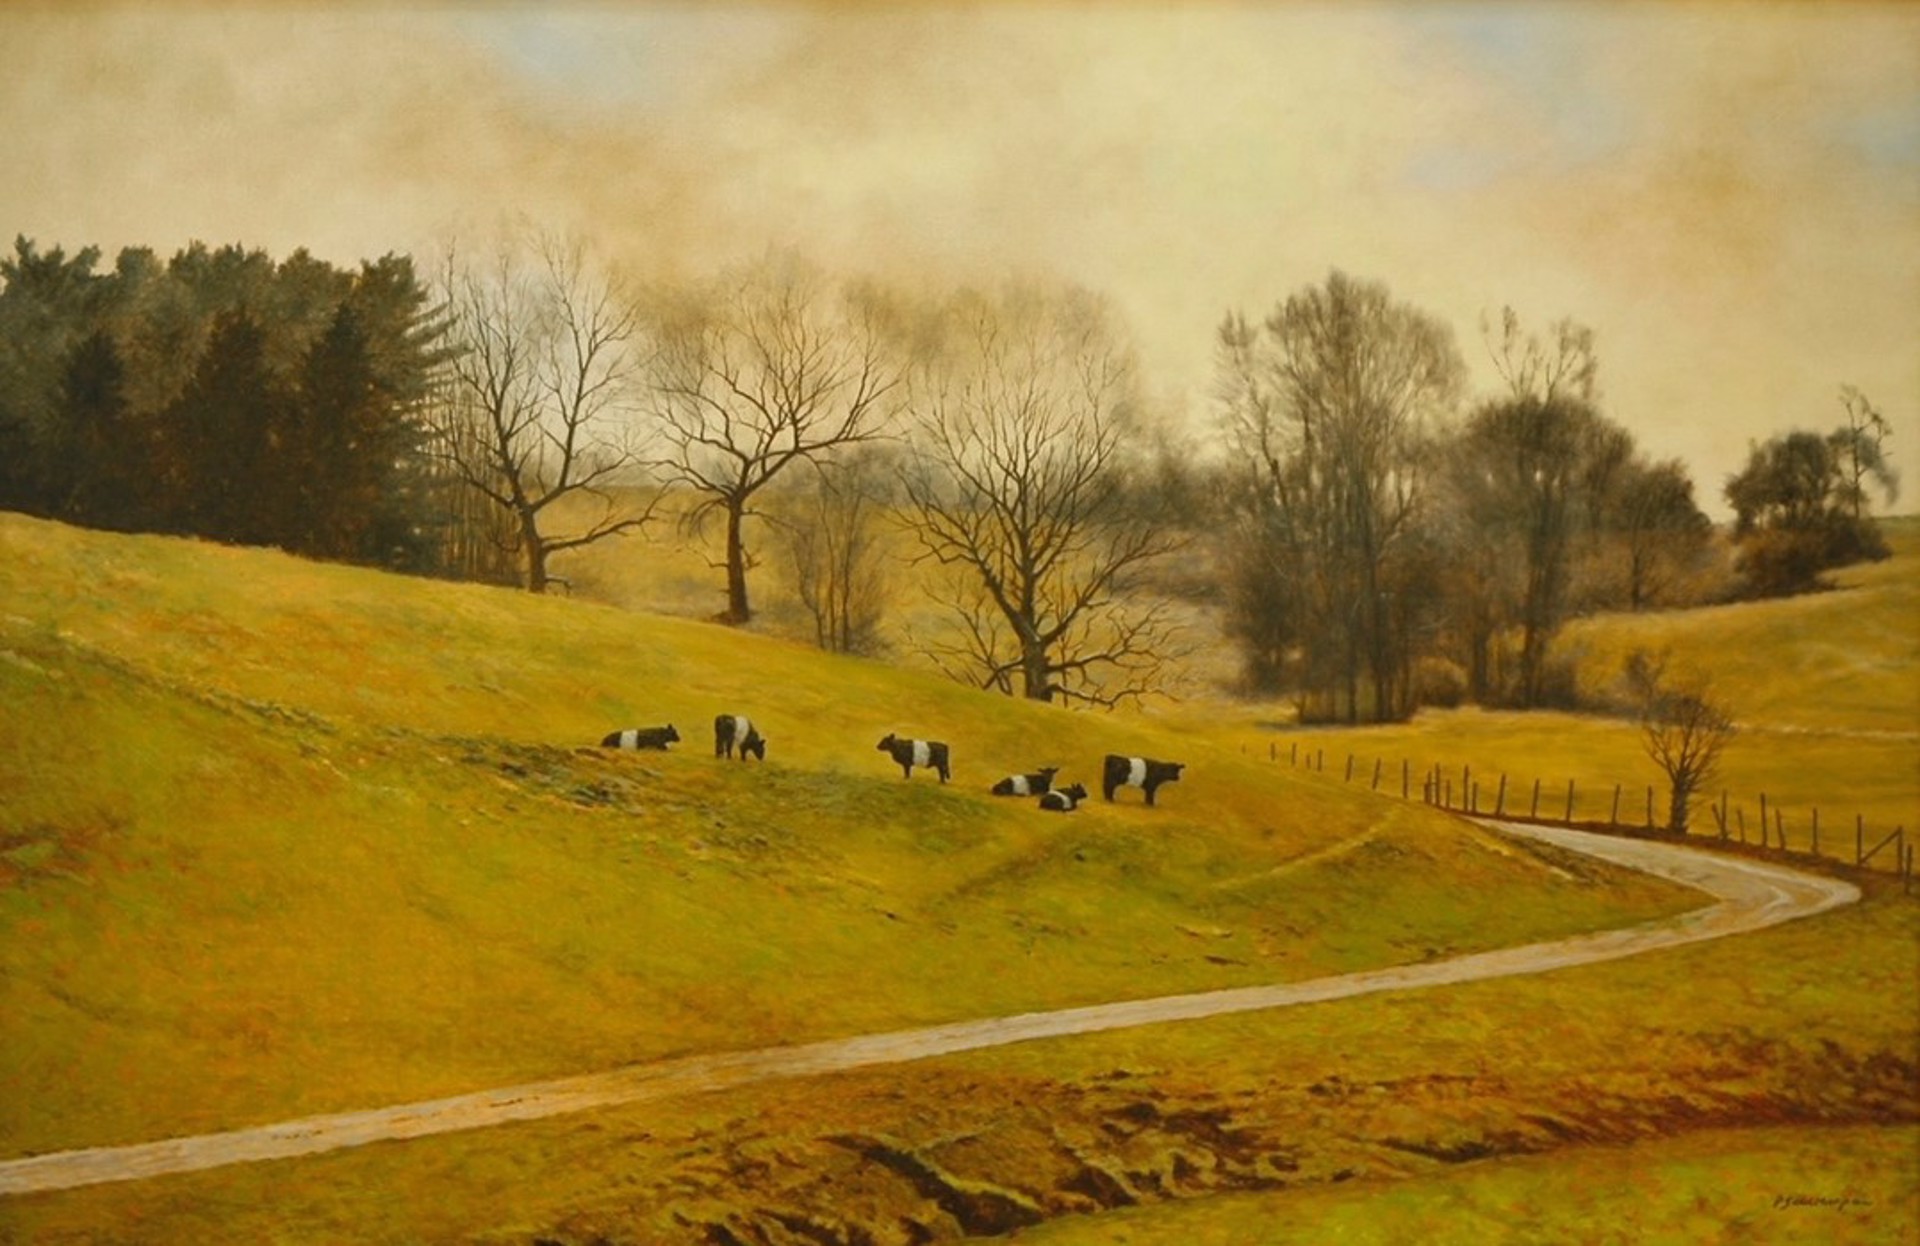 The Farm Track by Peter Sculthorpe